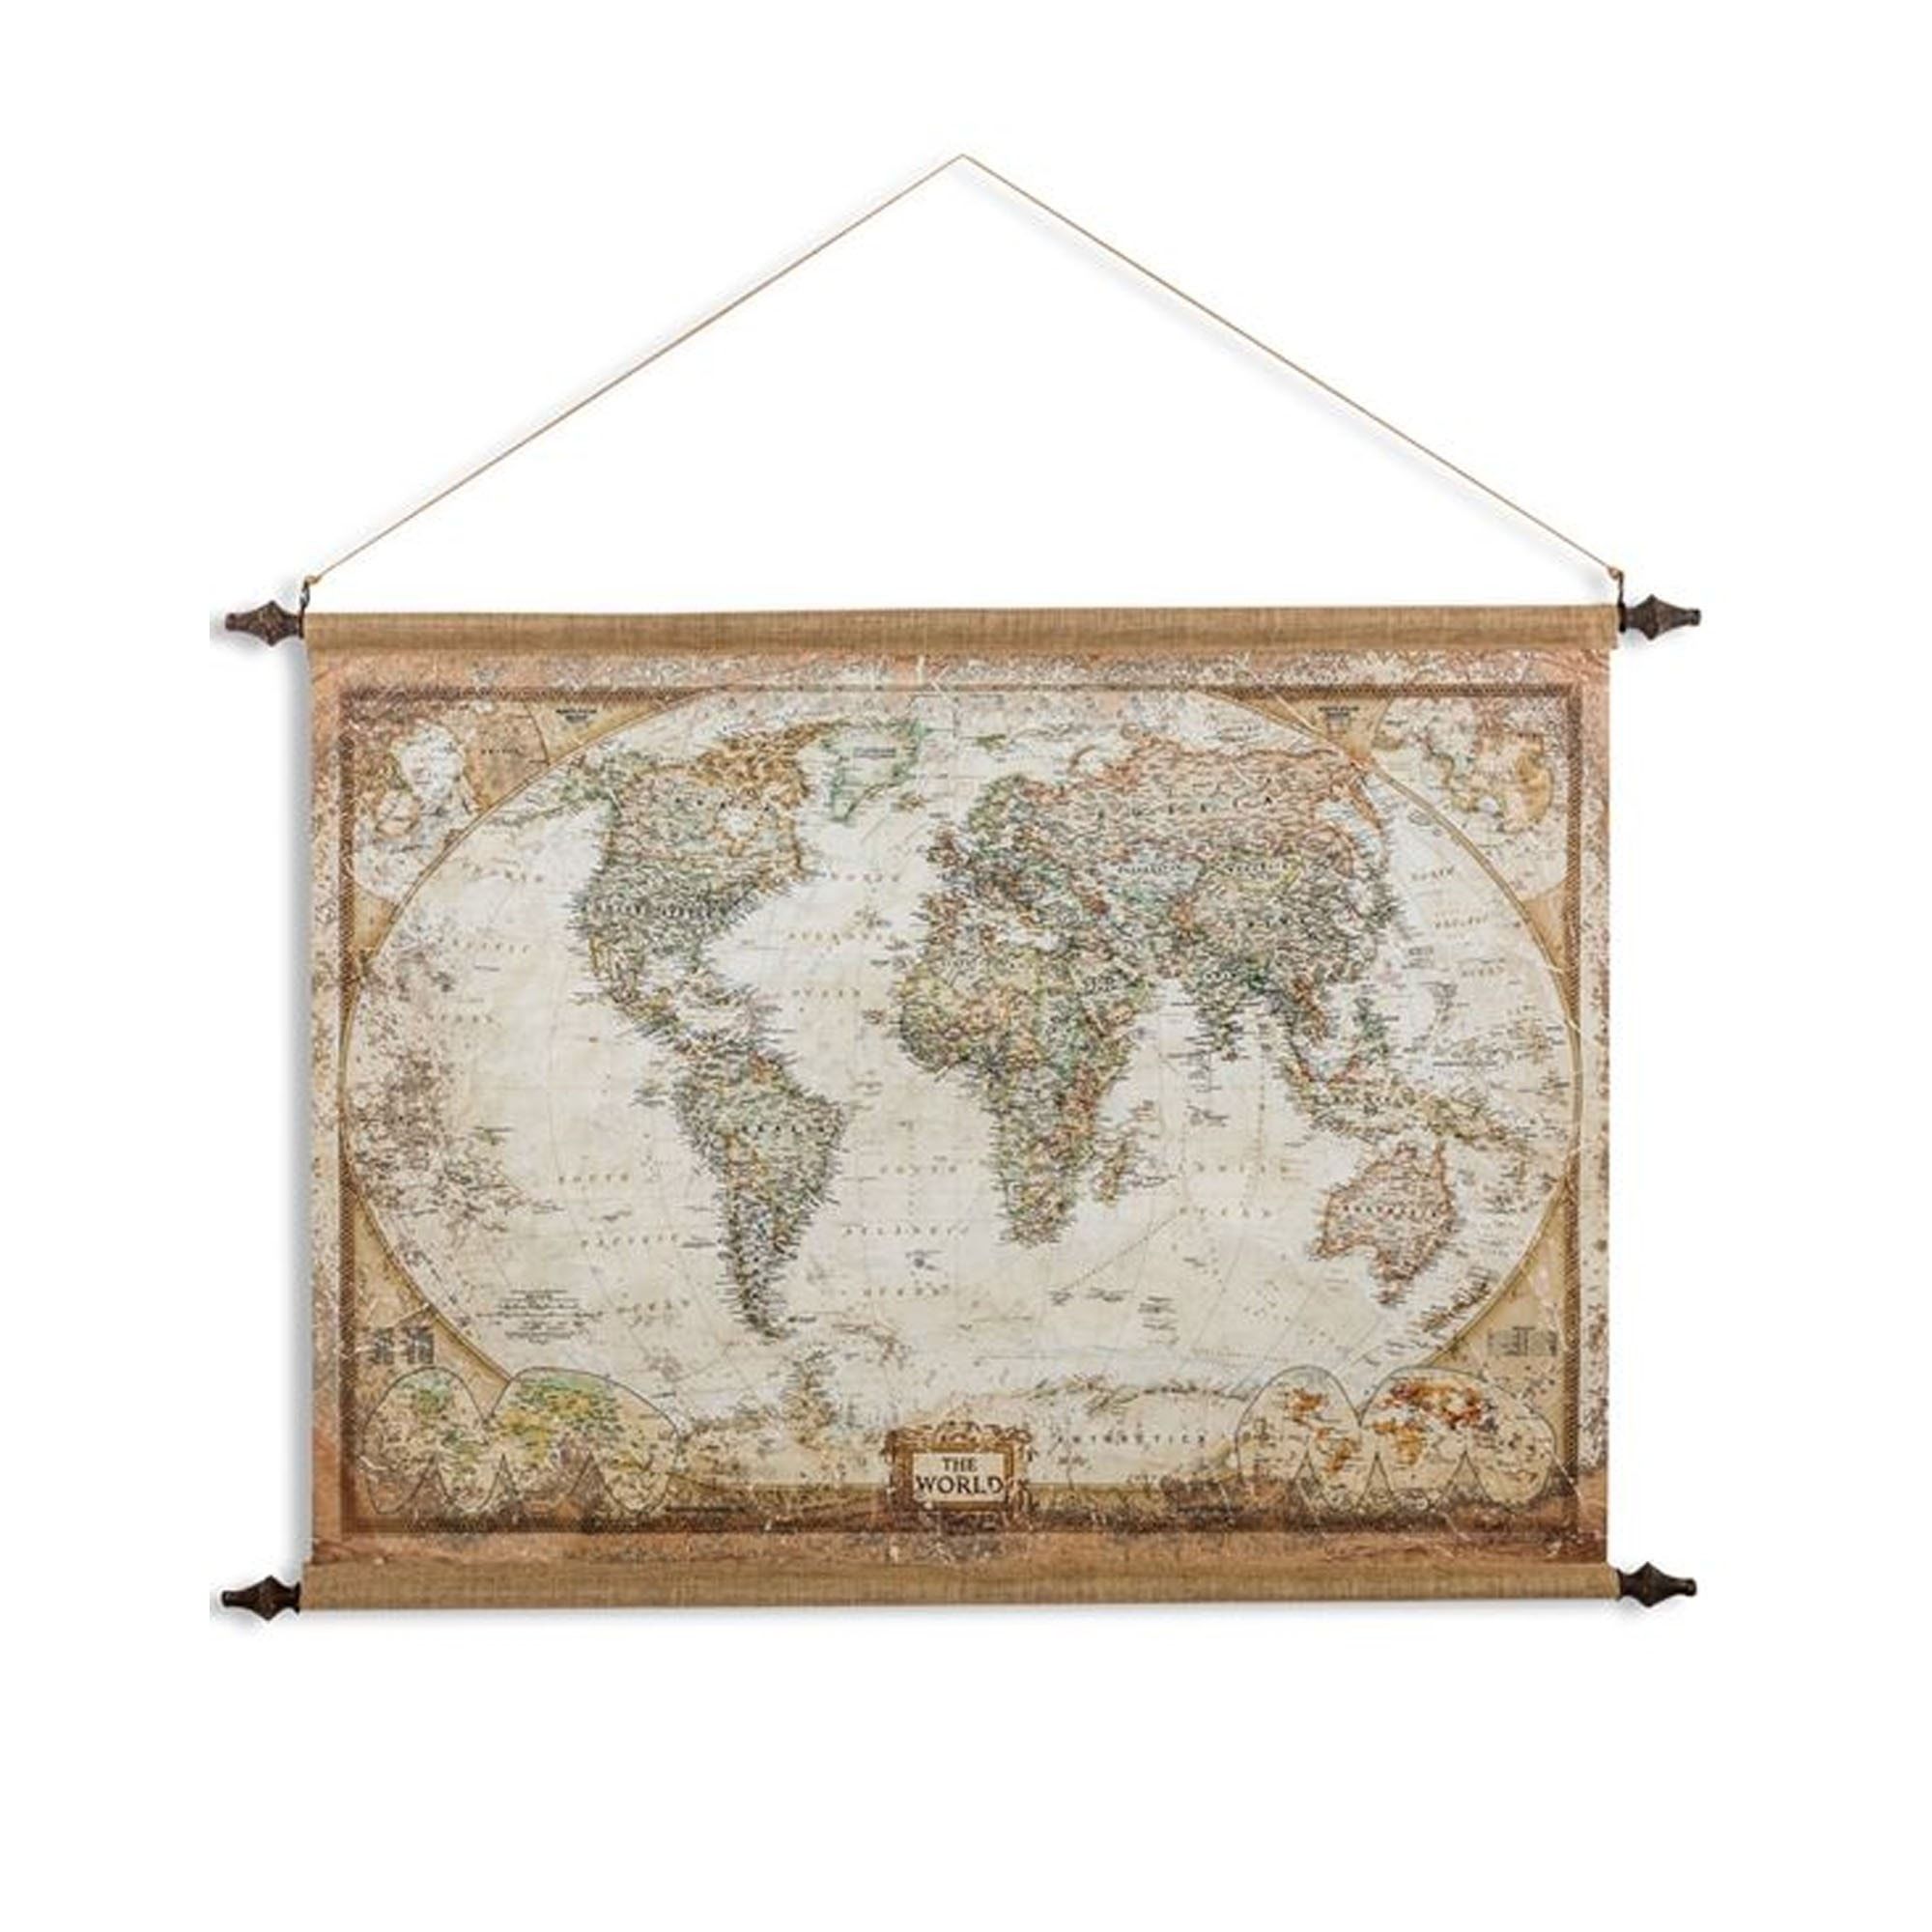 Large Antiqued Wall Hanging Canvas World Map | Large Canvas World Map In Most Recent Globe Wall Art (View 11 of 20)